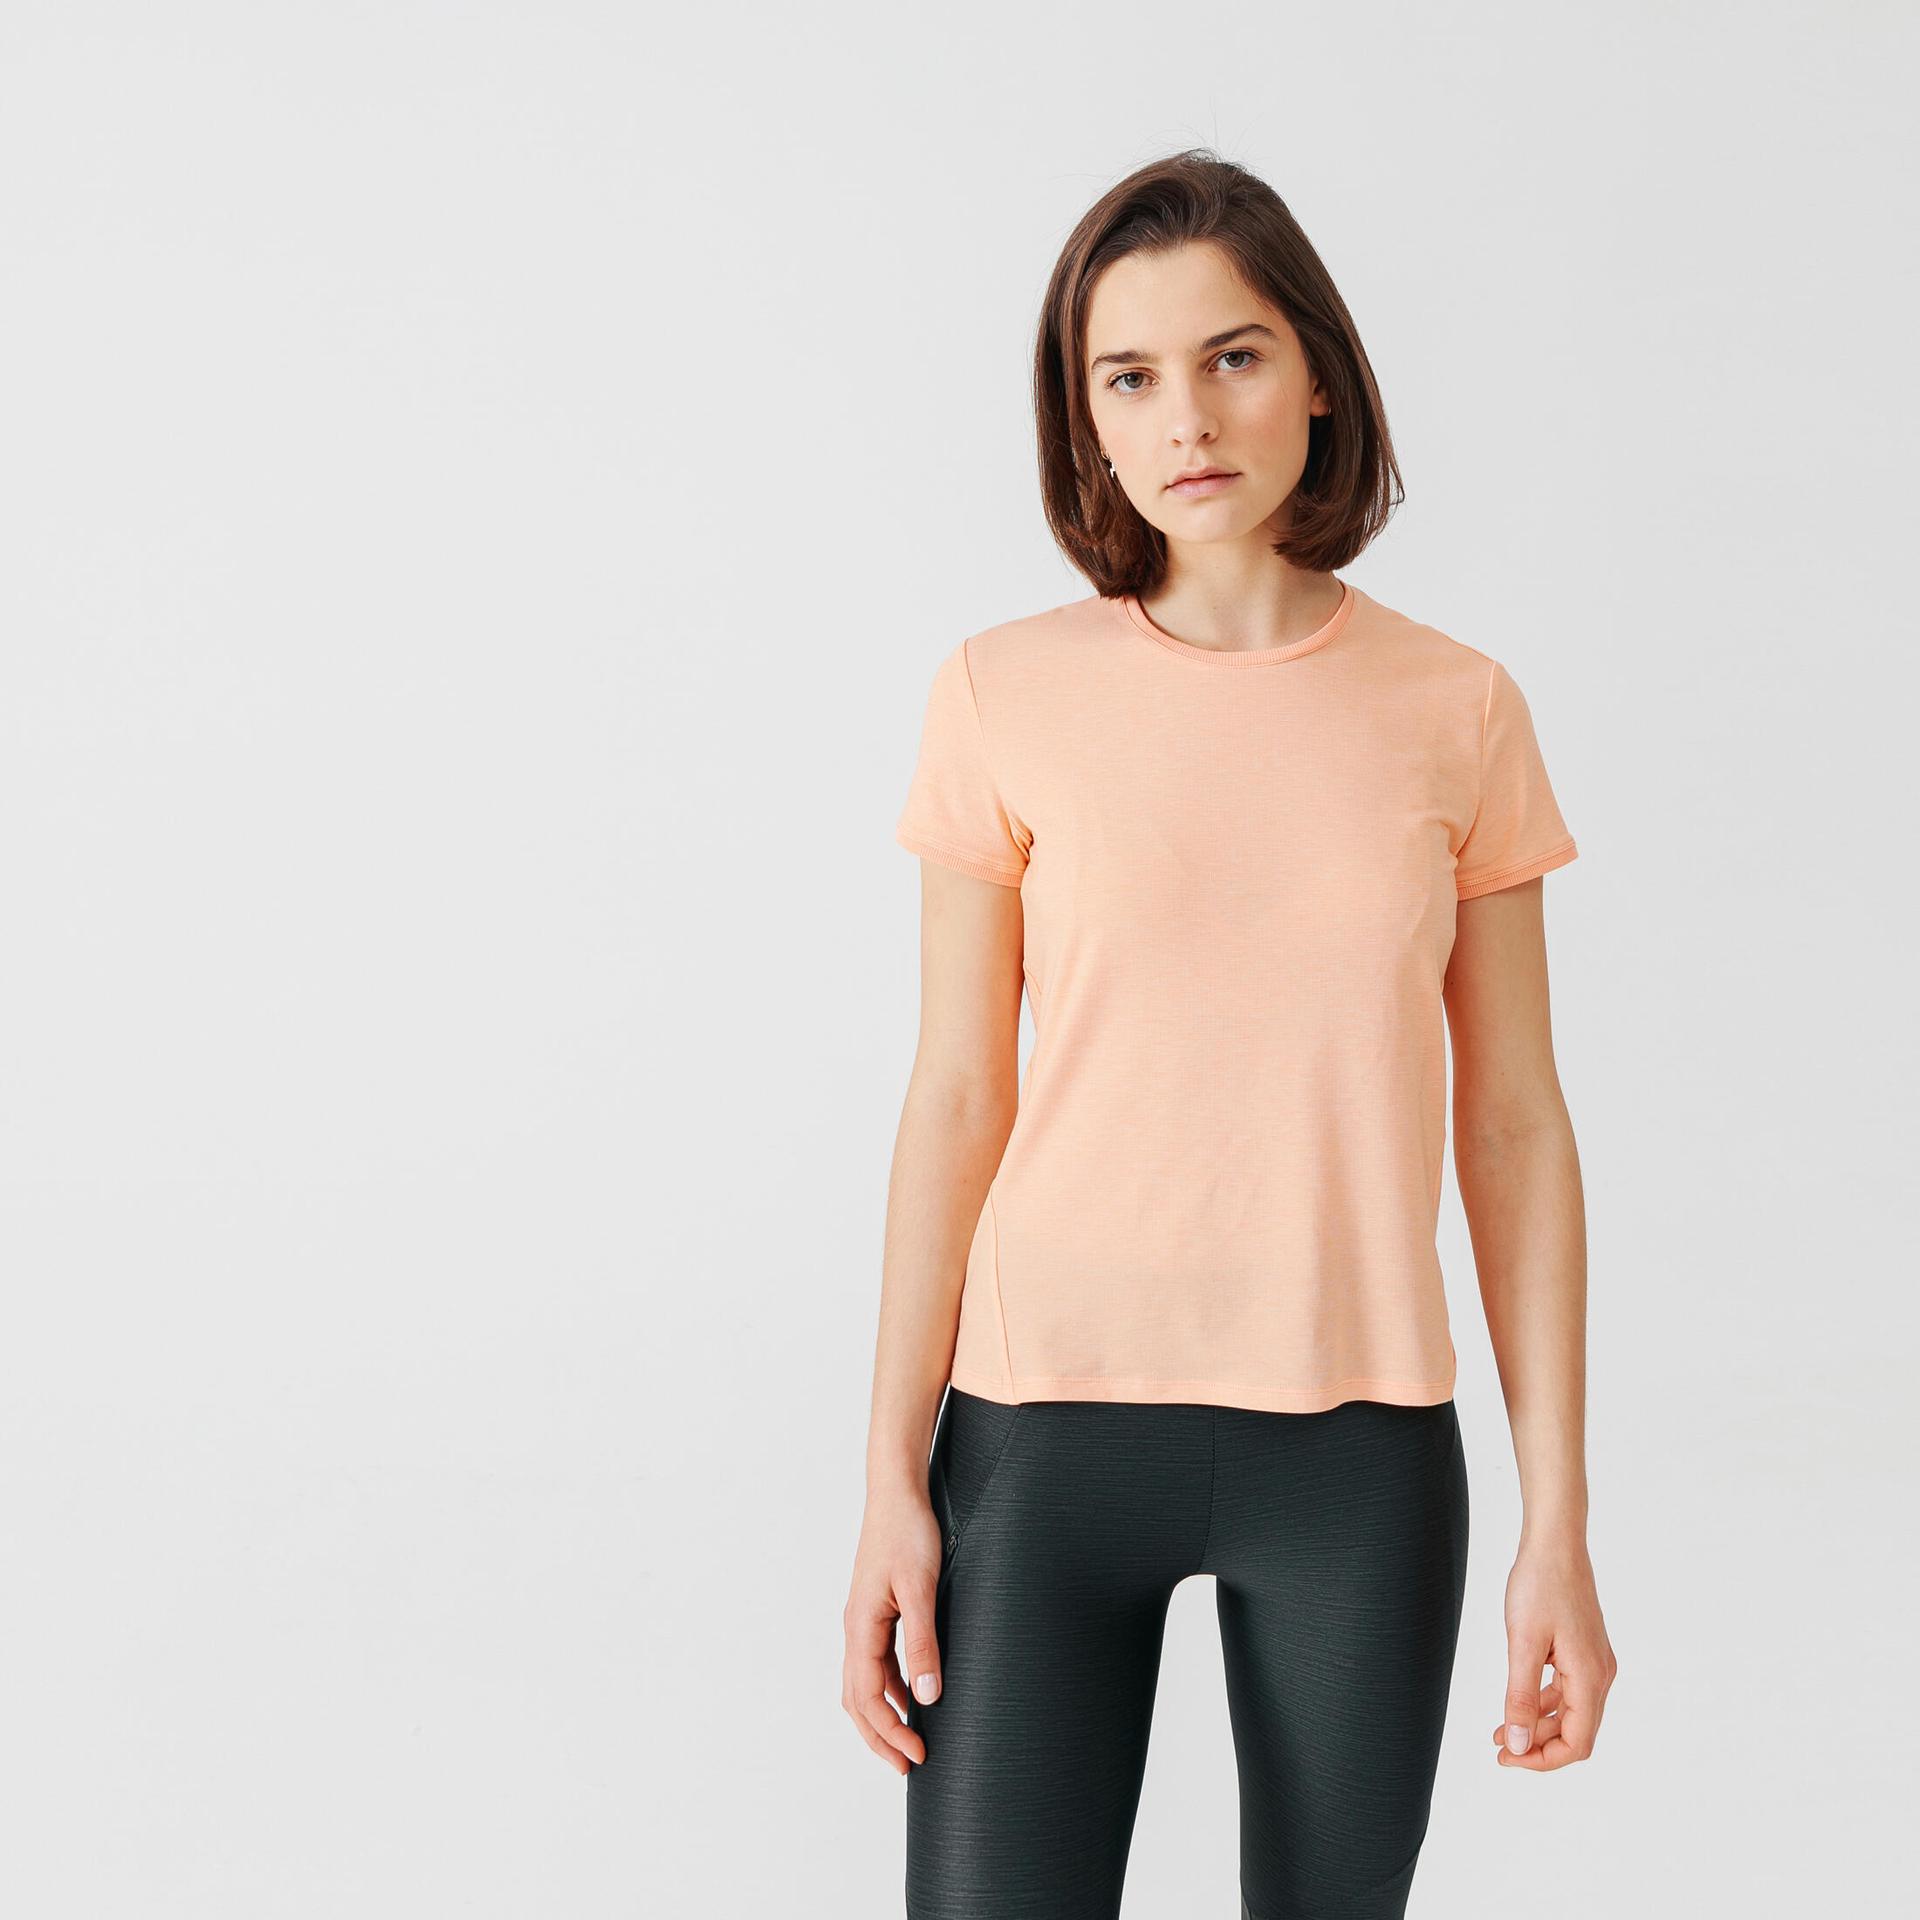 soft and breathable women's running t-shirt - orange